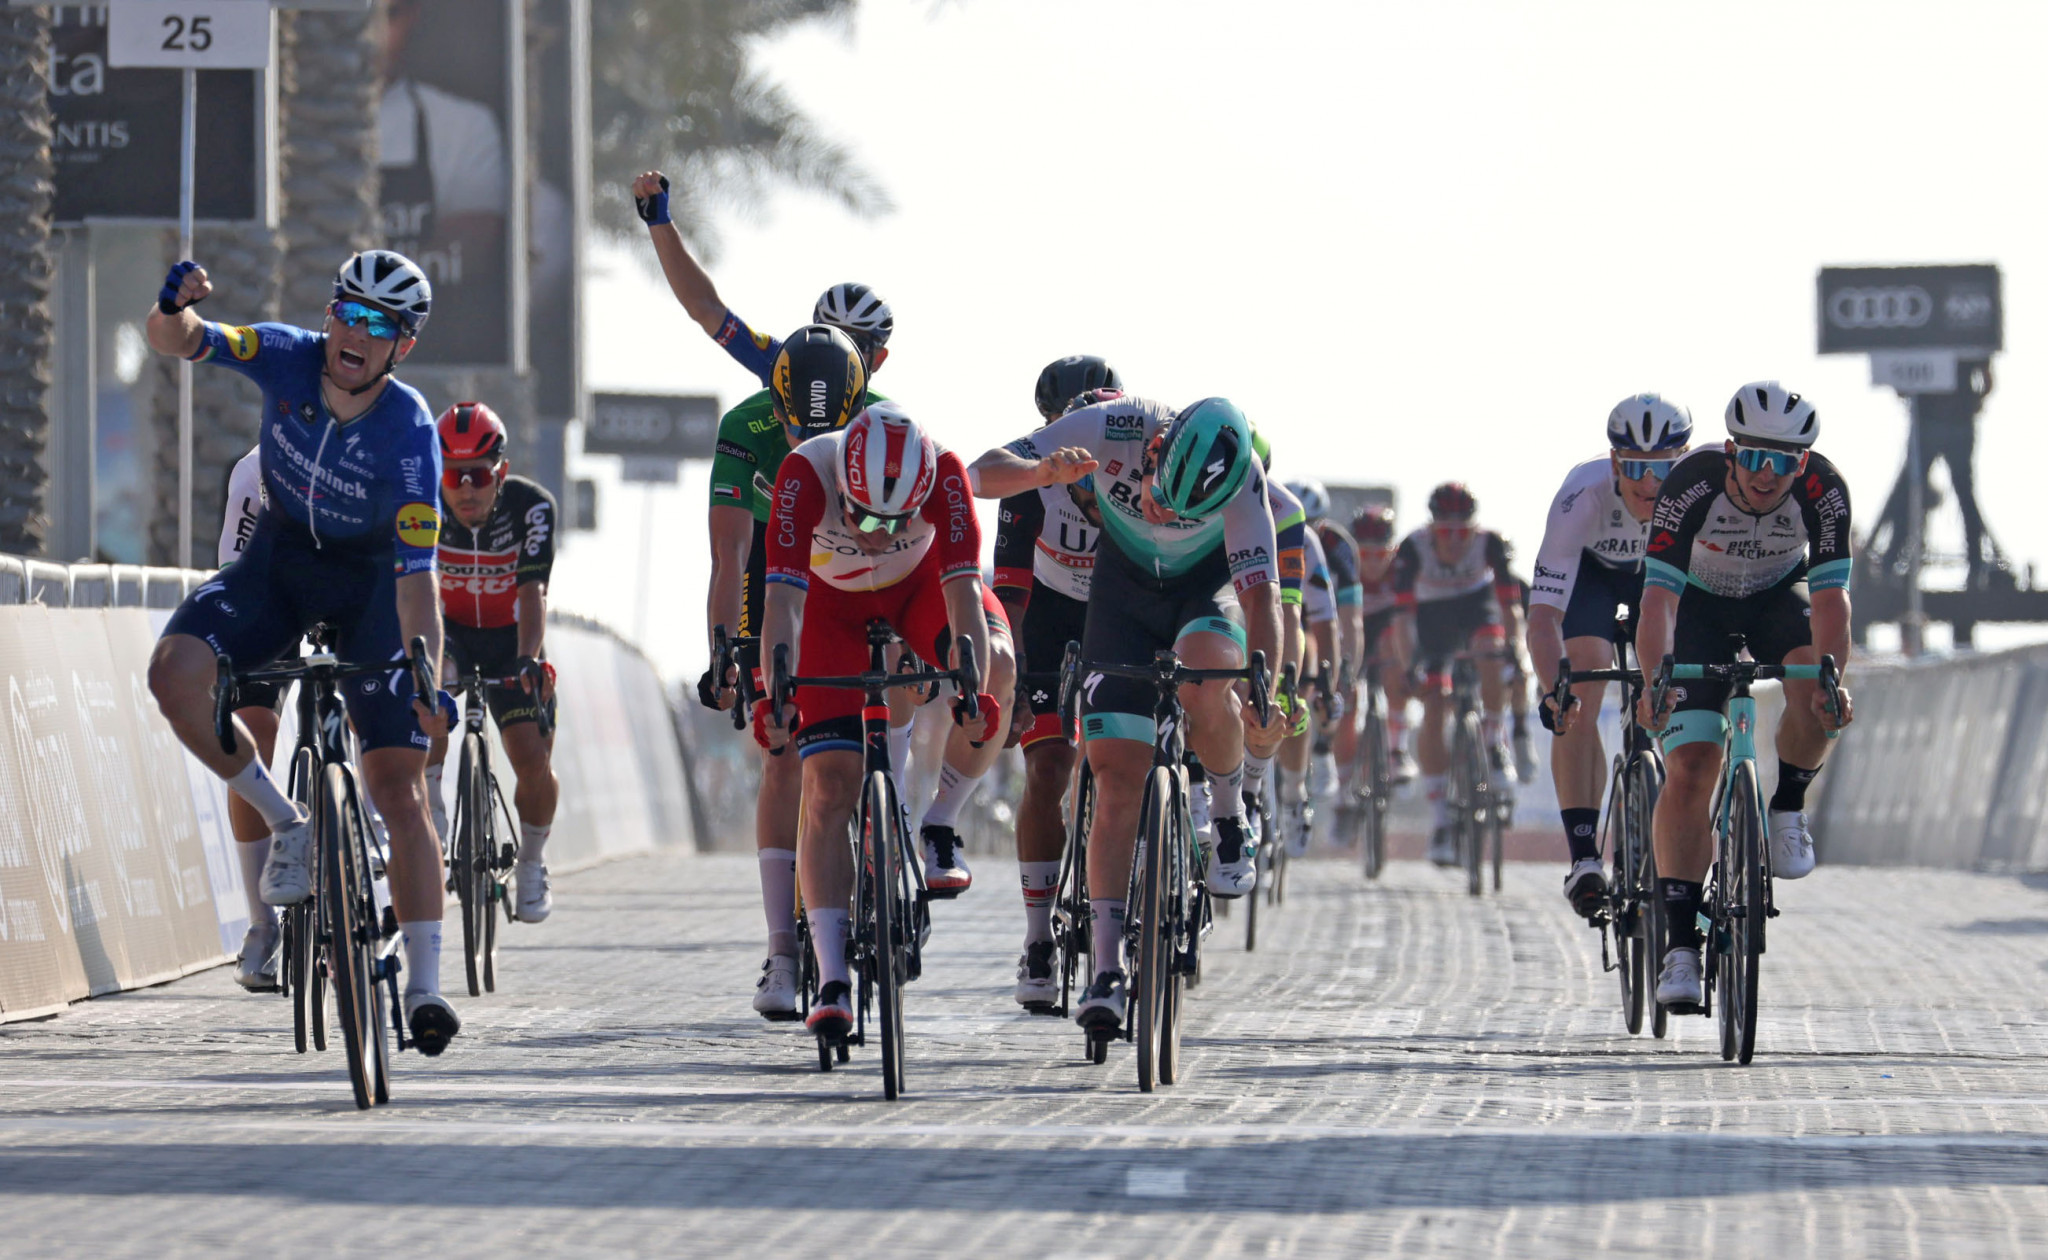 Sam Bennett claimed his second stage win of the UAE Tour ©Getty Images